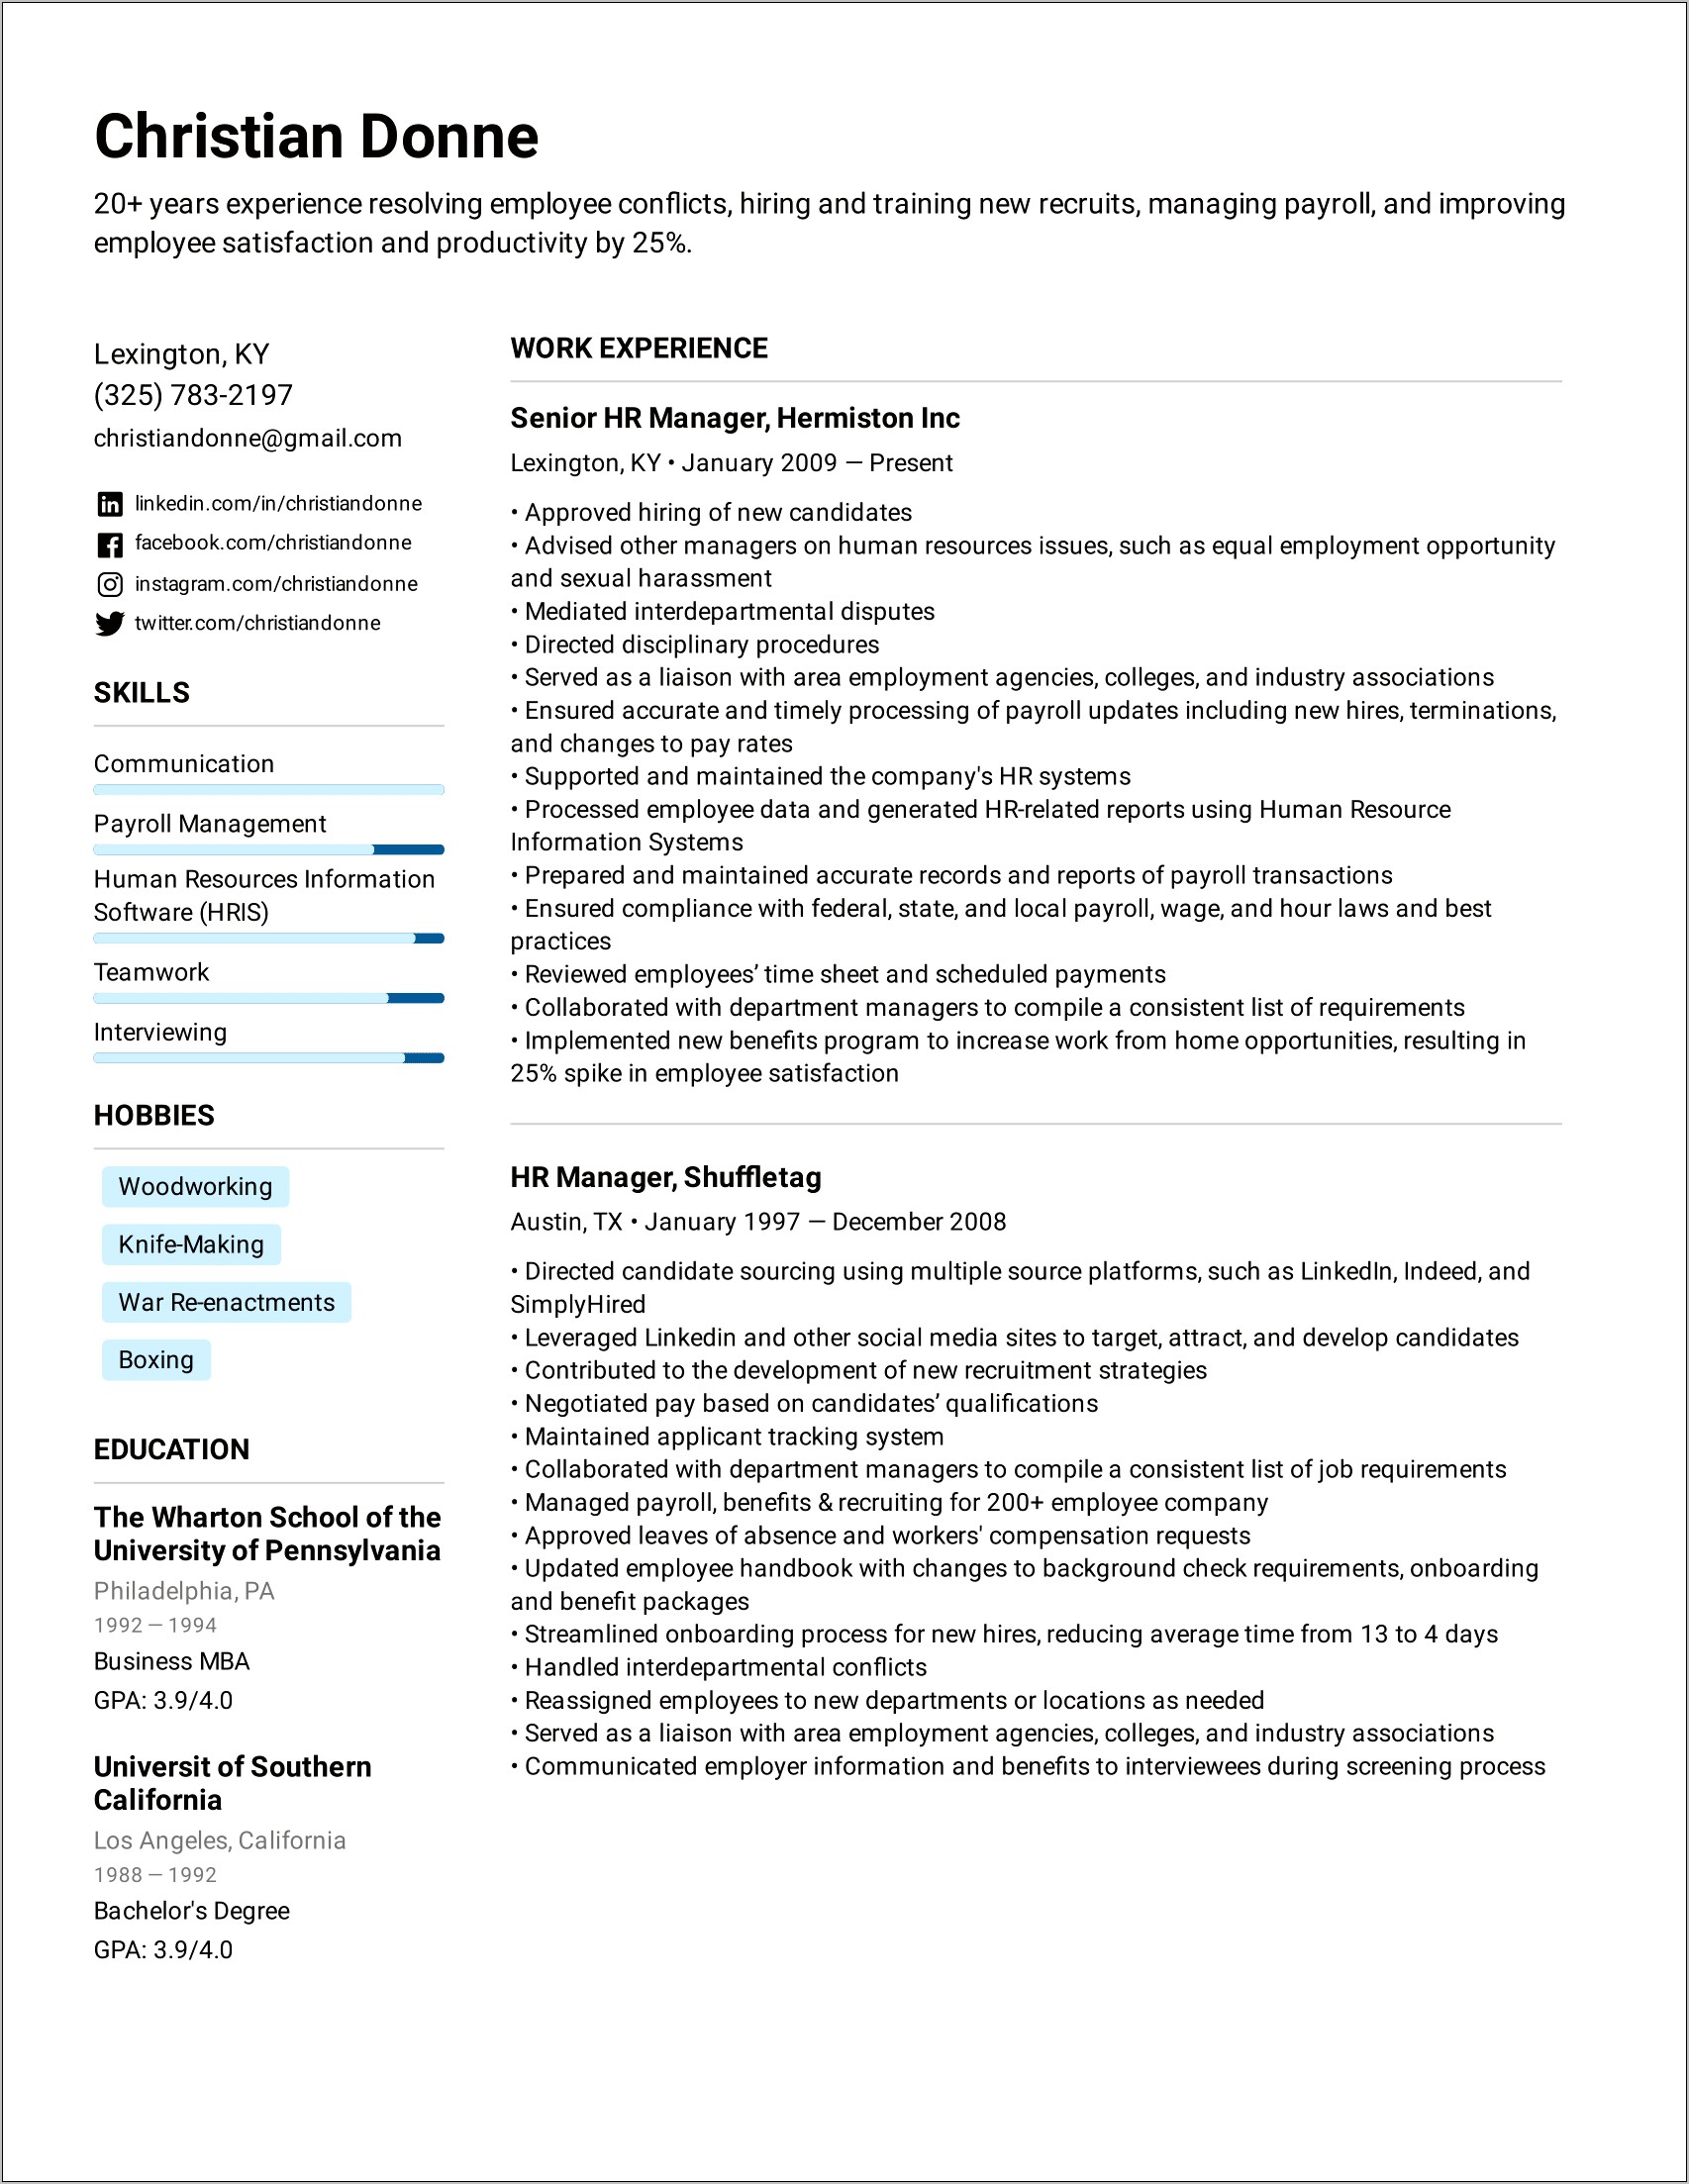 Examples Of Salon Owner Resume